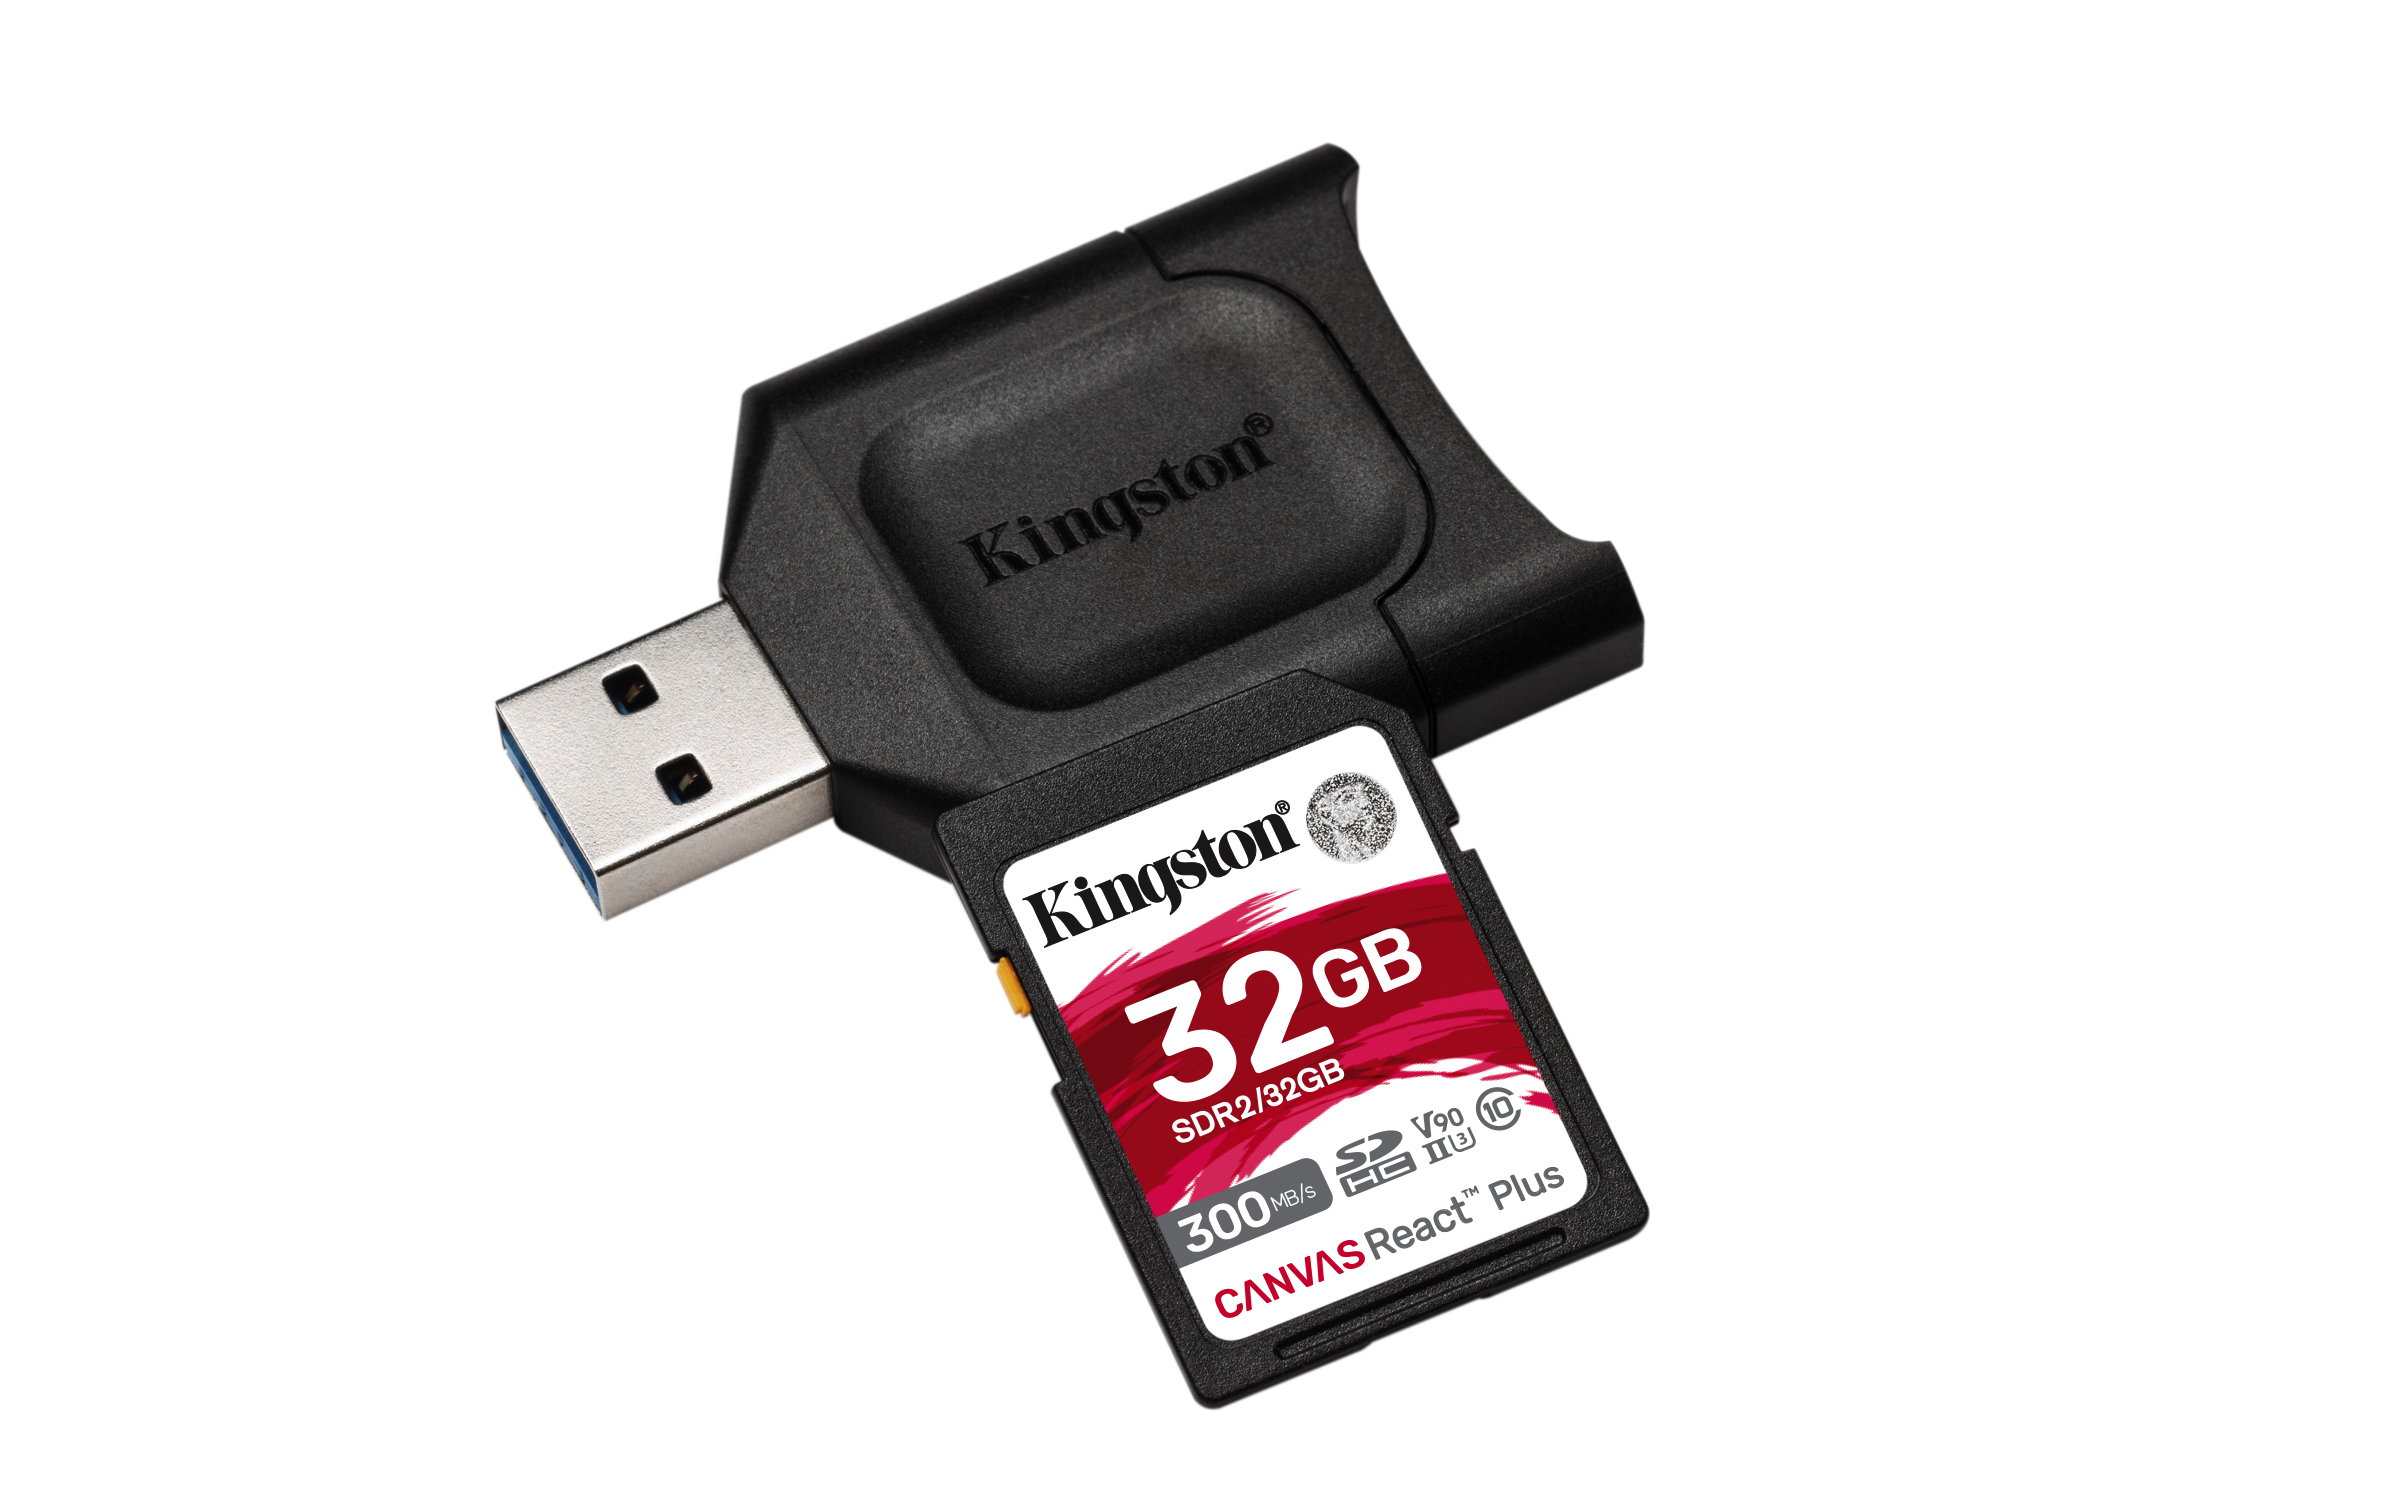 Kingston 32GB Canvas React Plus SDHC V90 UHS-II Memory Card with SD Card Reader - image 1 of 2